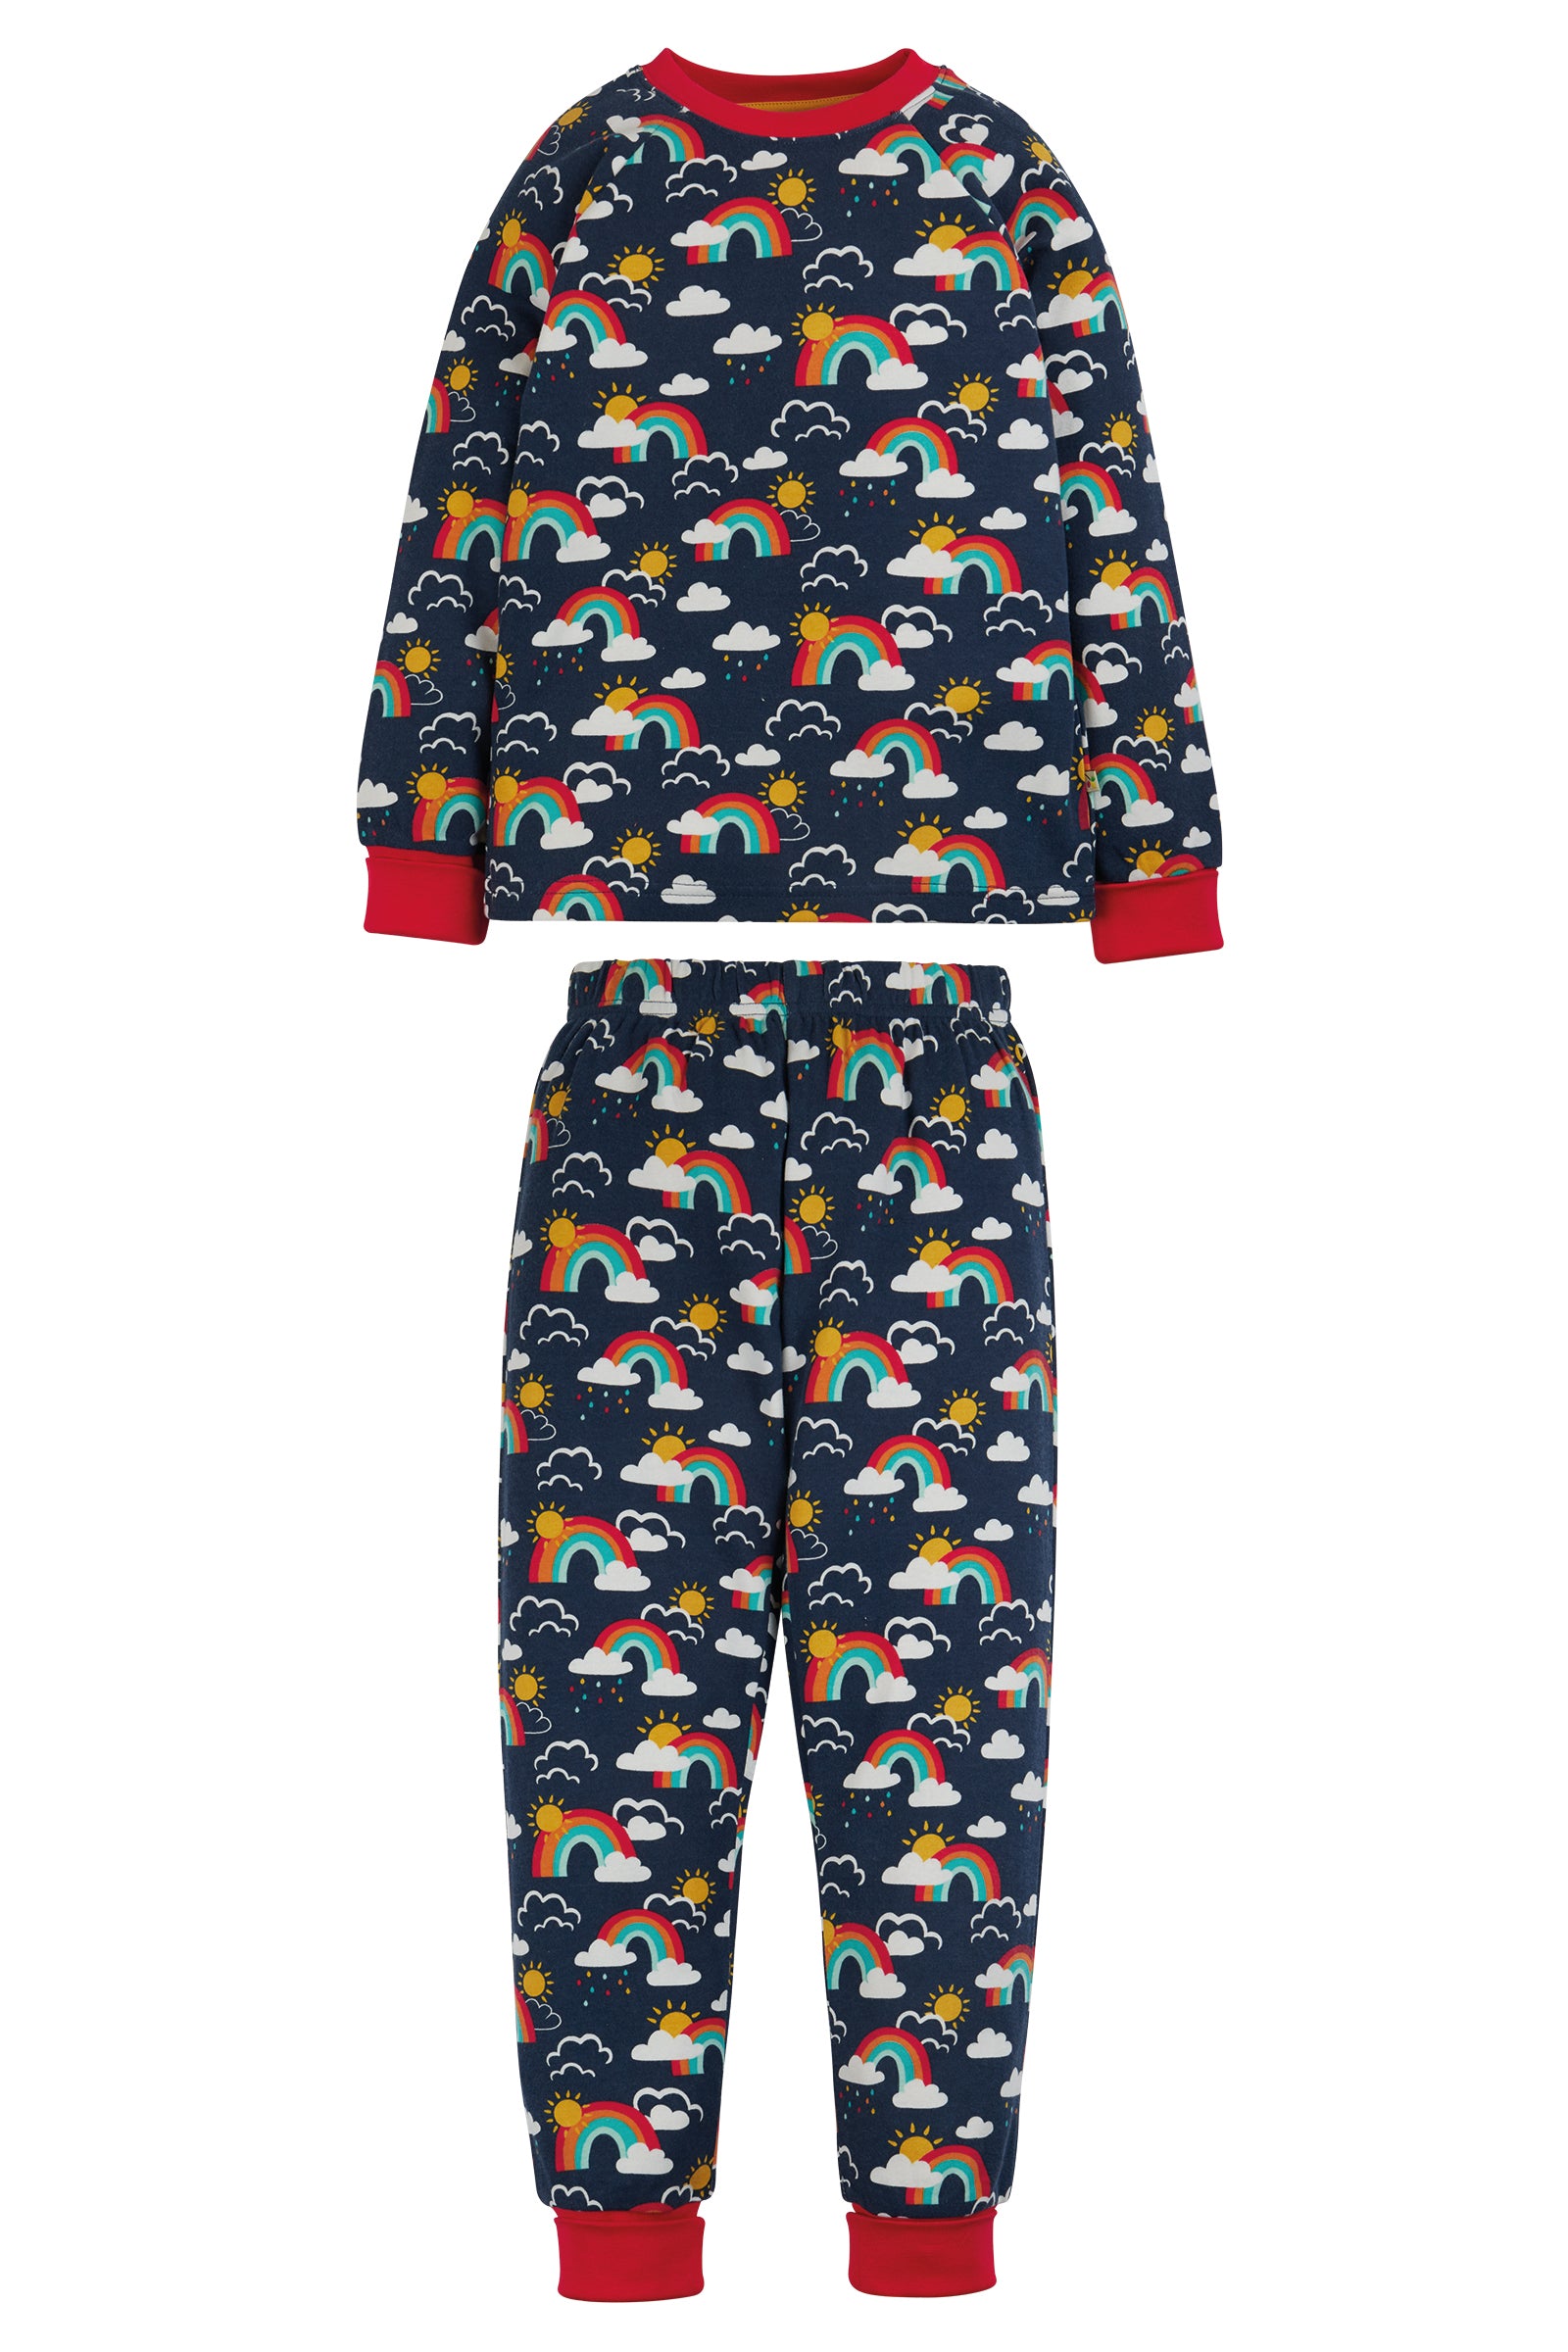 navy pjs with a rainbow print and contrast red cuffs